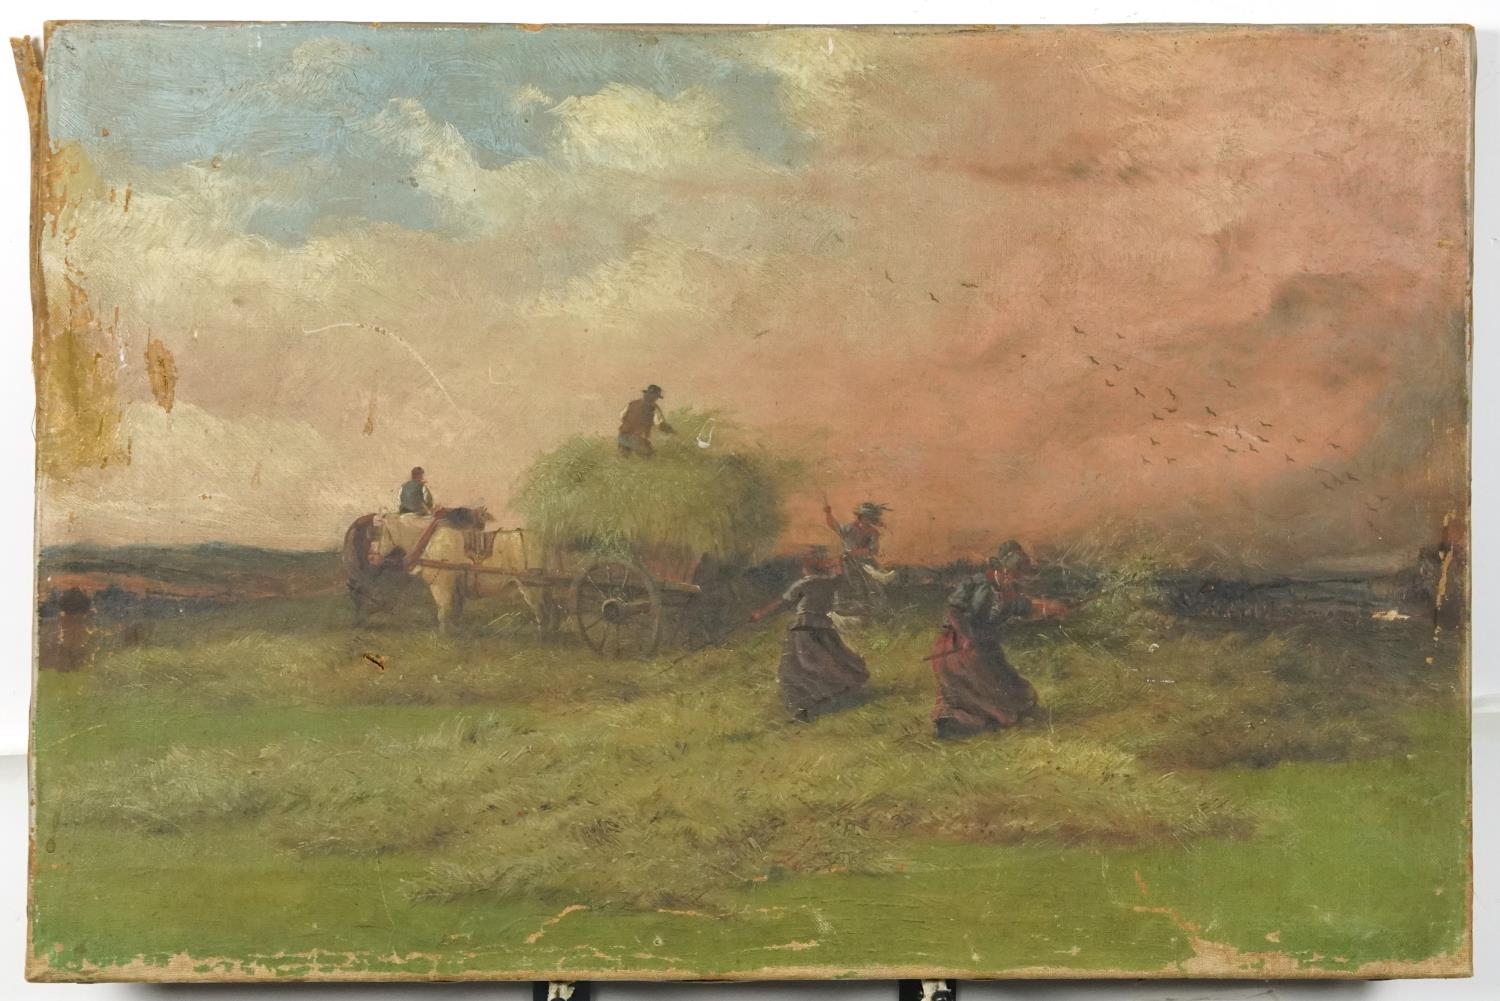 Smith - Toss the Hay When the Wind Blows, Thirsk, 19th century Irish school oil on canvas, inscribed - Image 2 of 5